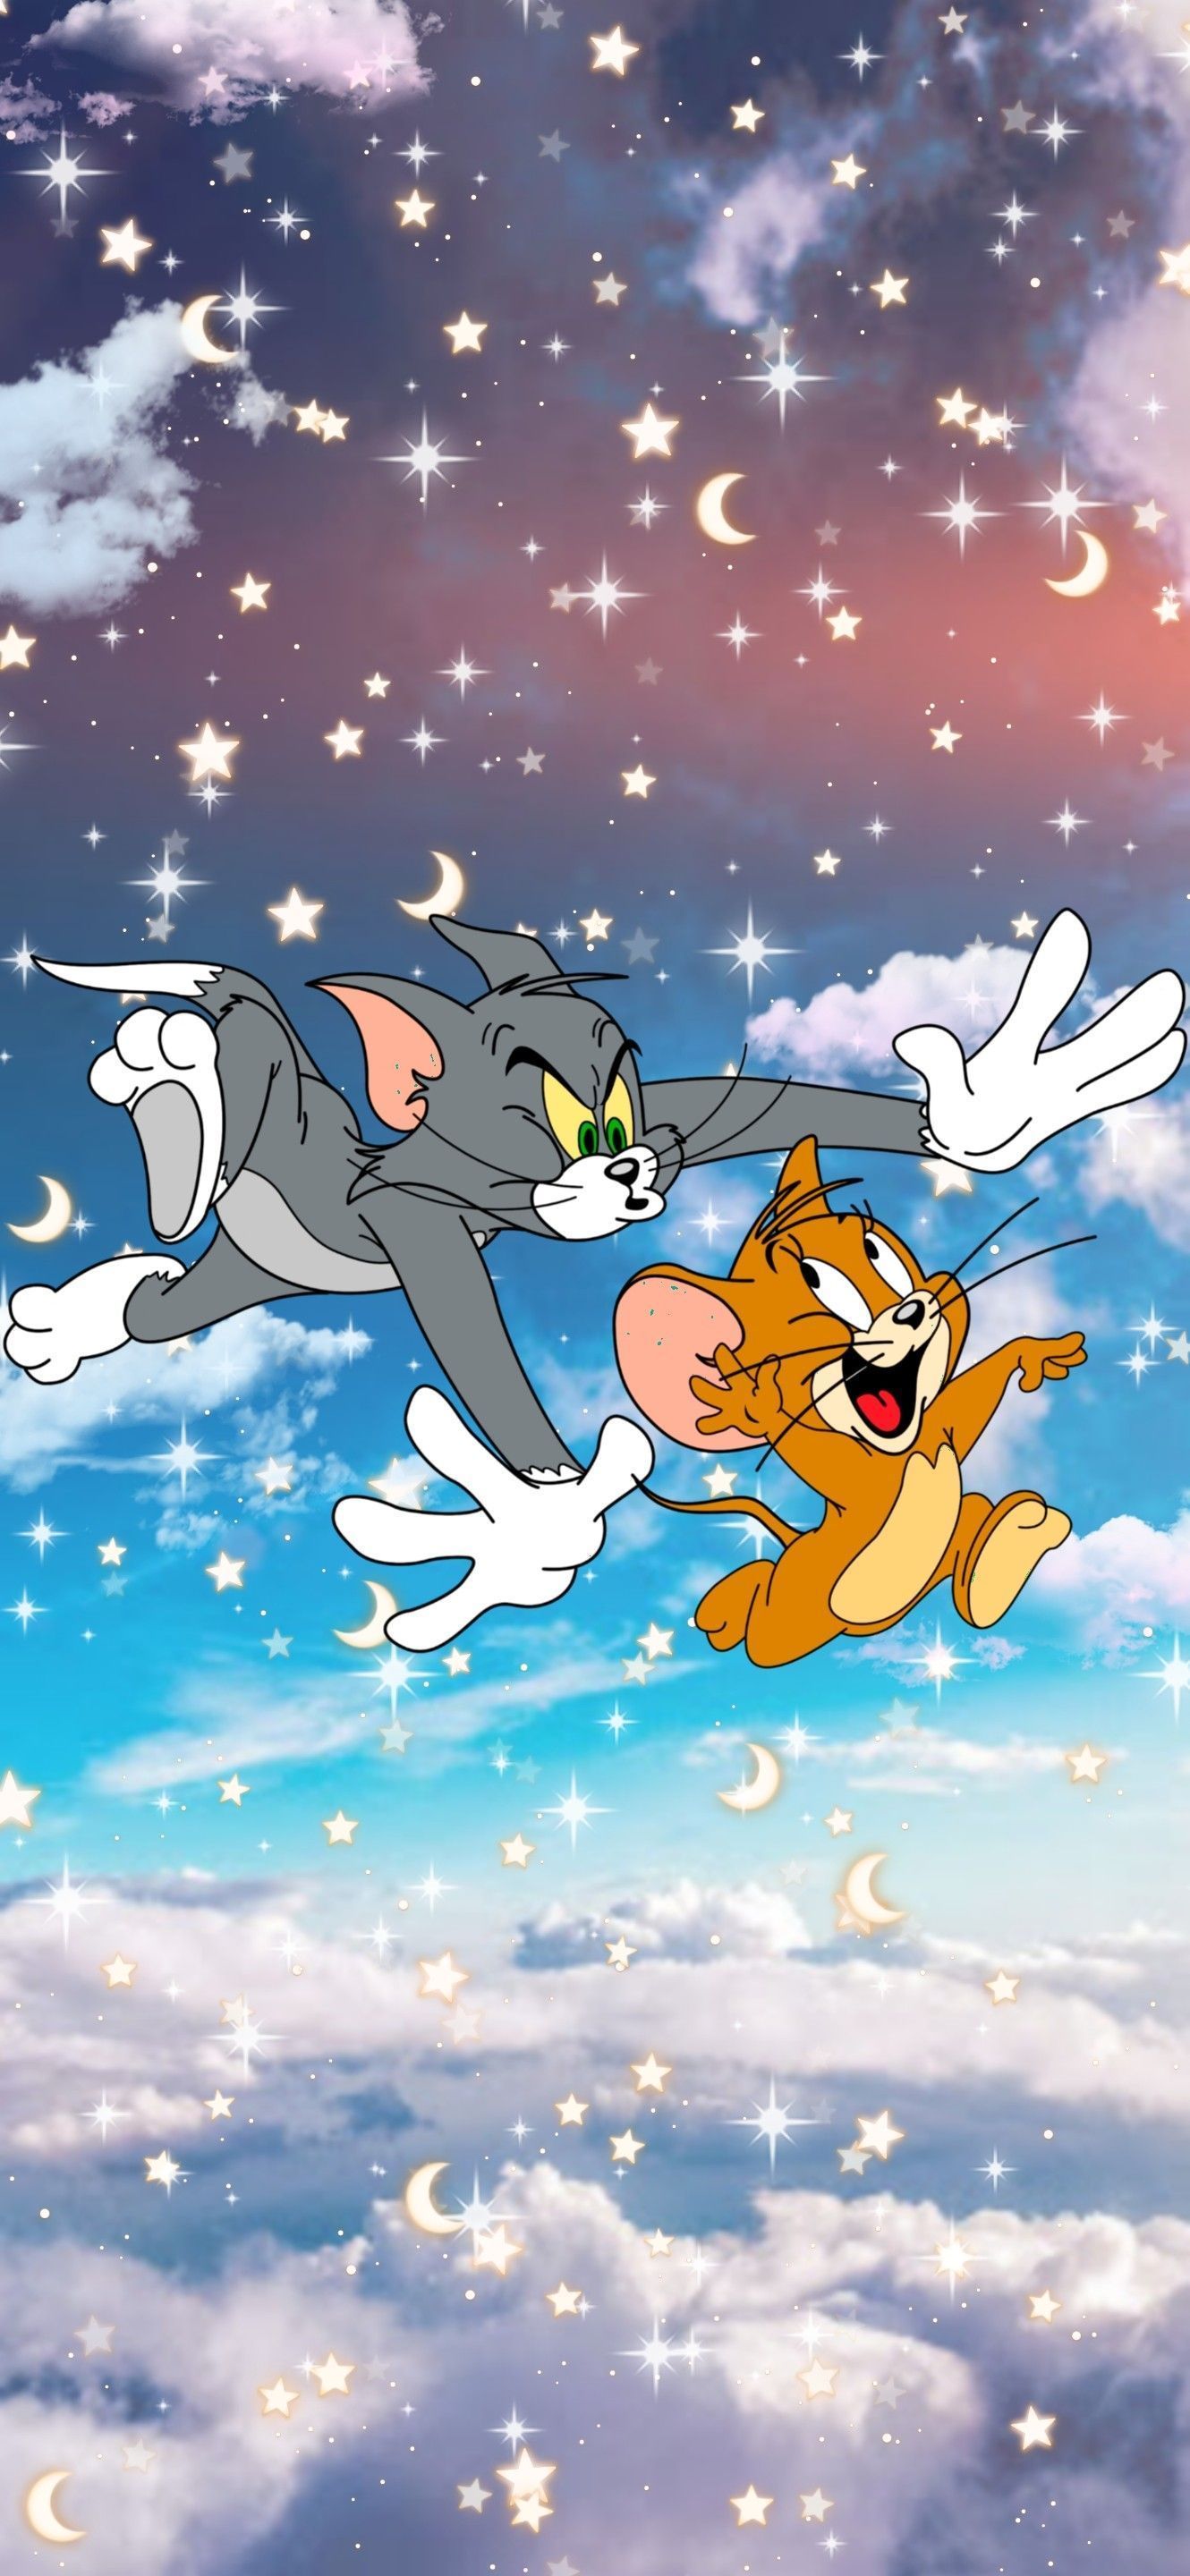 A cartoon cat and mouse flying in the sky - Tom and Jerry